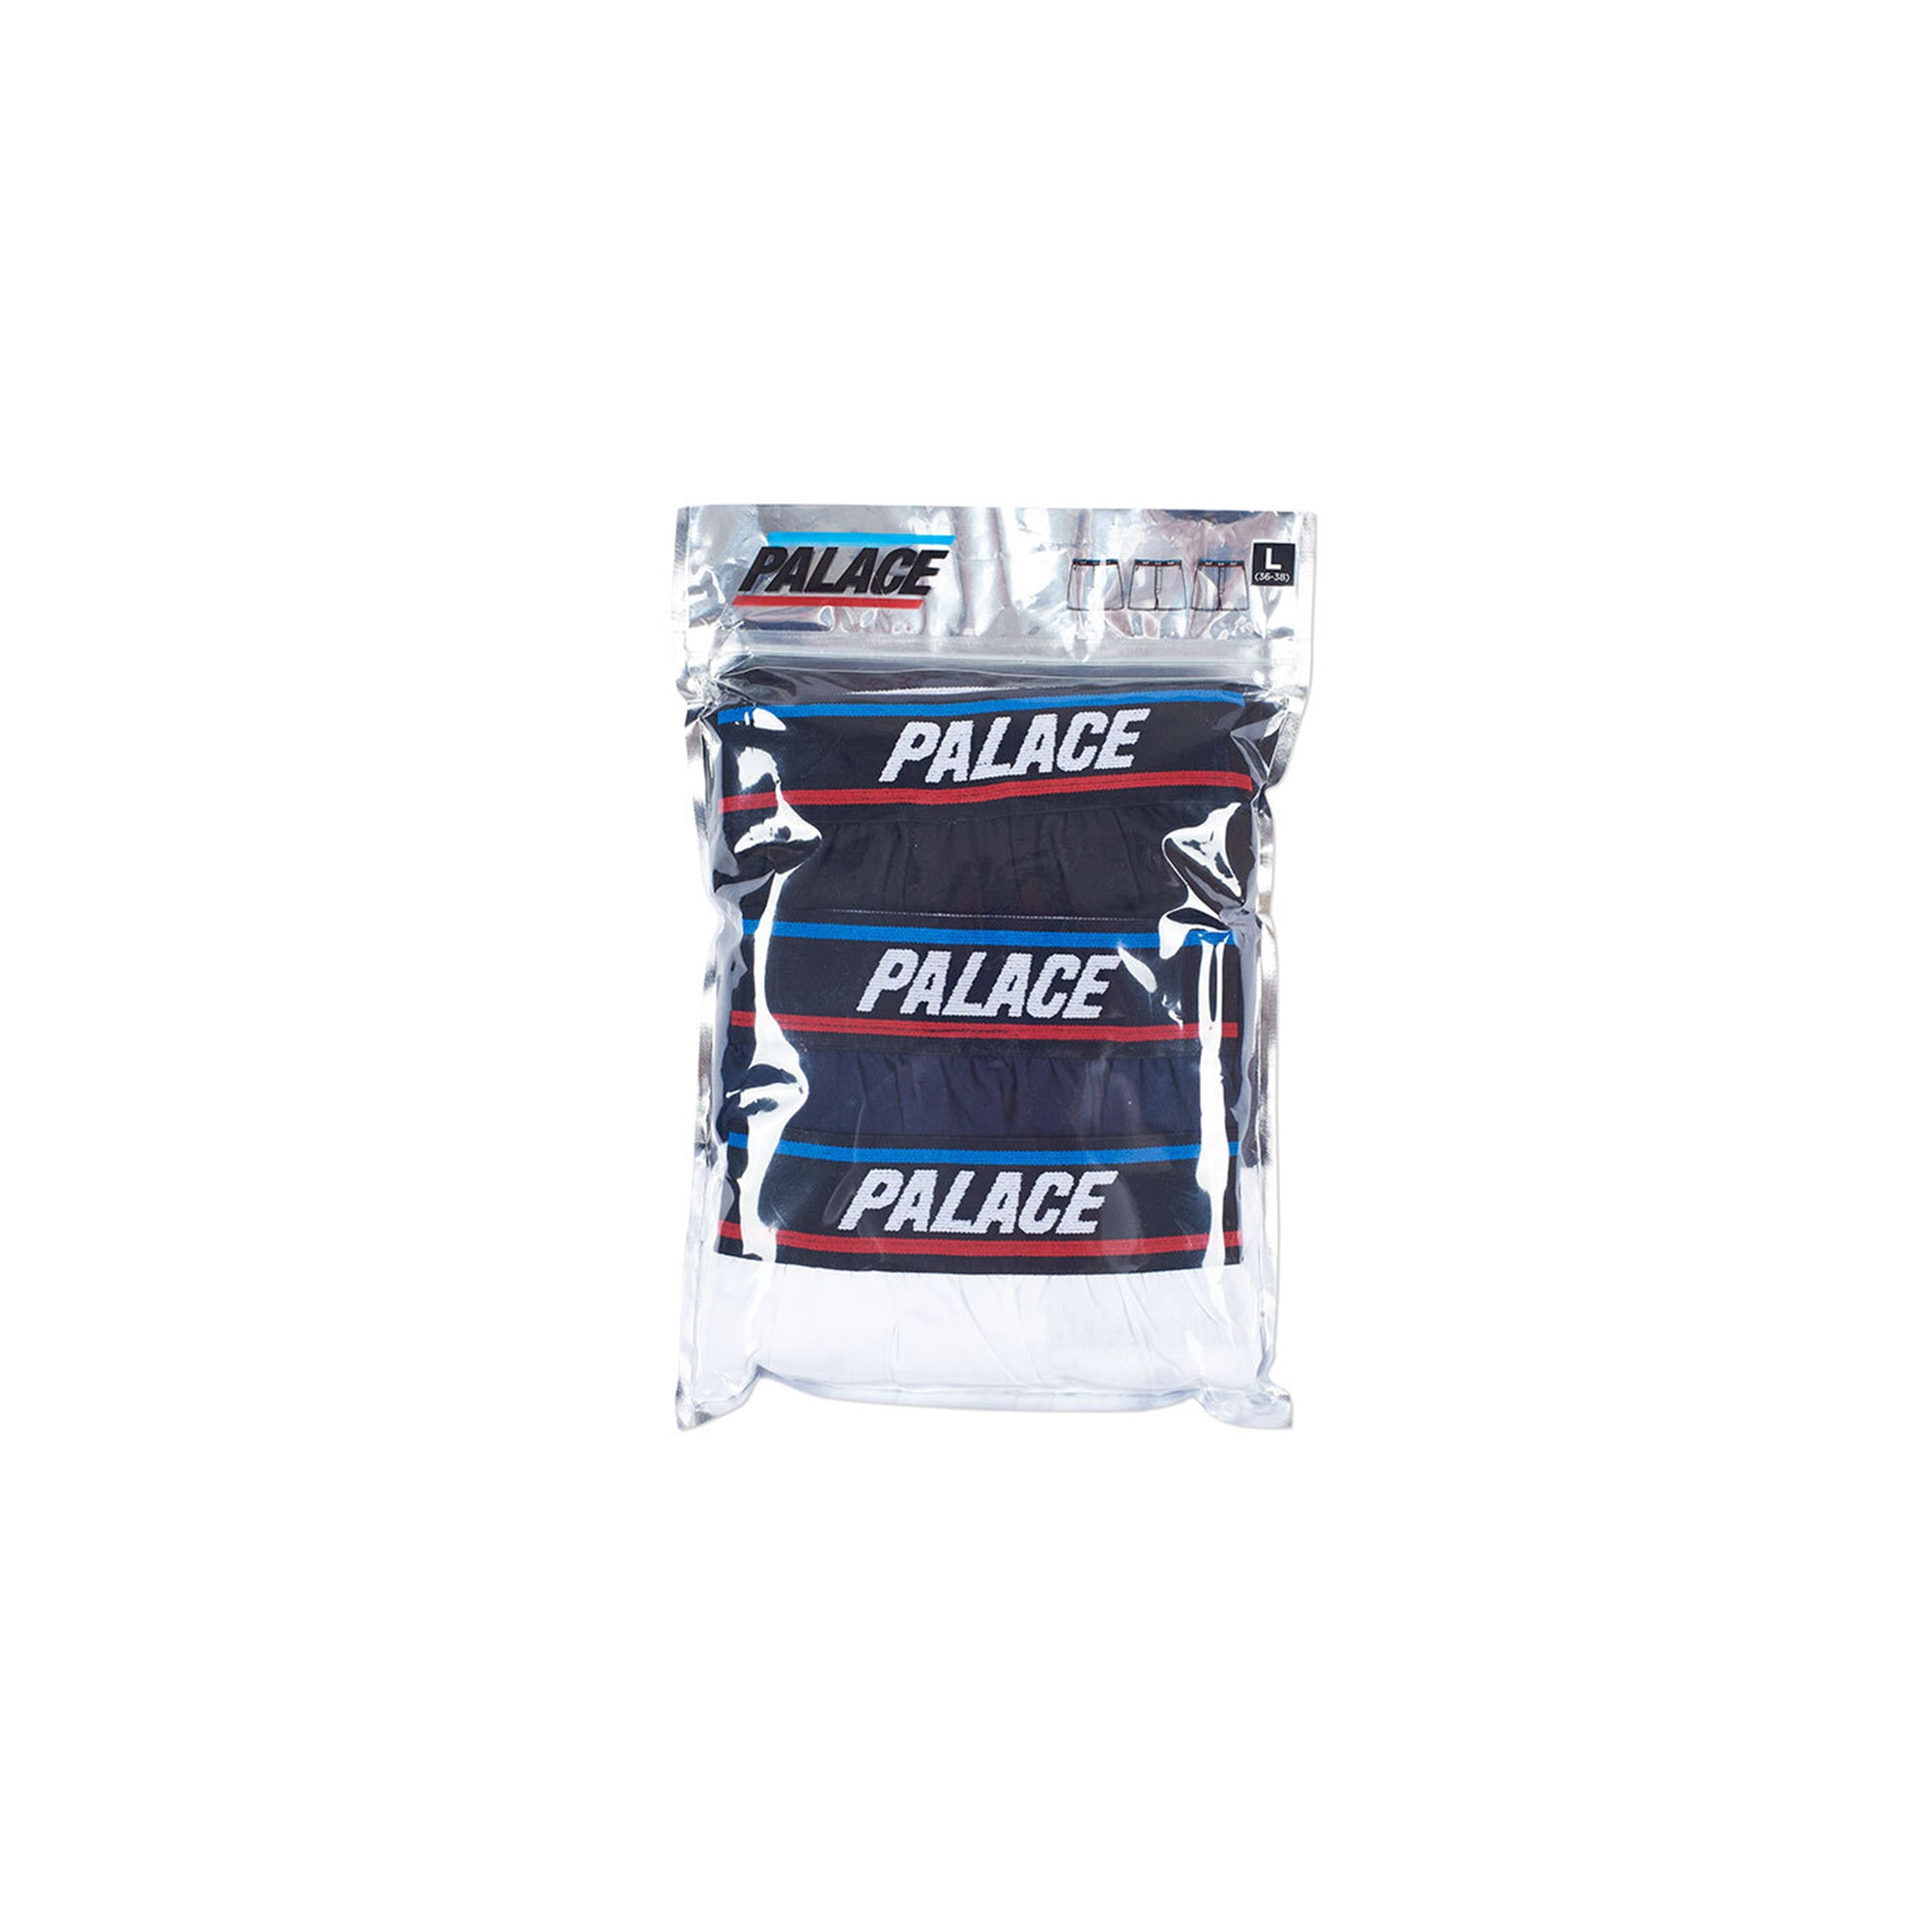 Palace - Men’s Basically A Pack Of Boxers - (Black/Natural) view 1